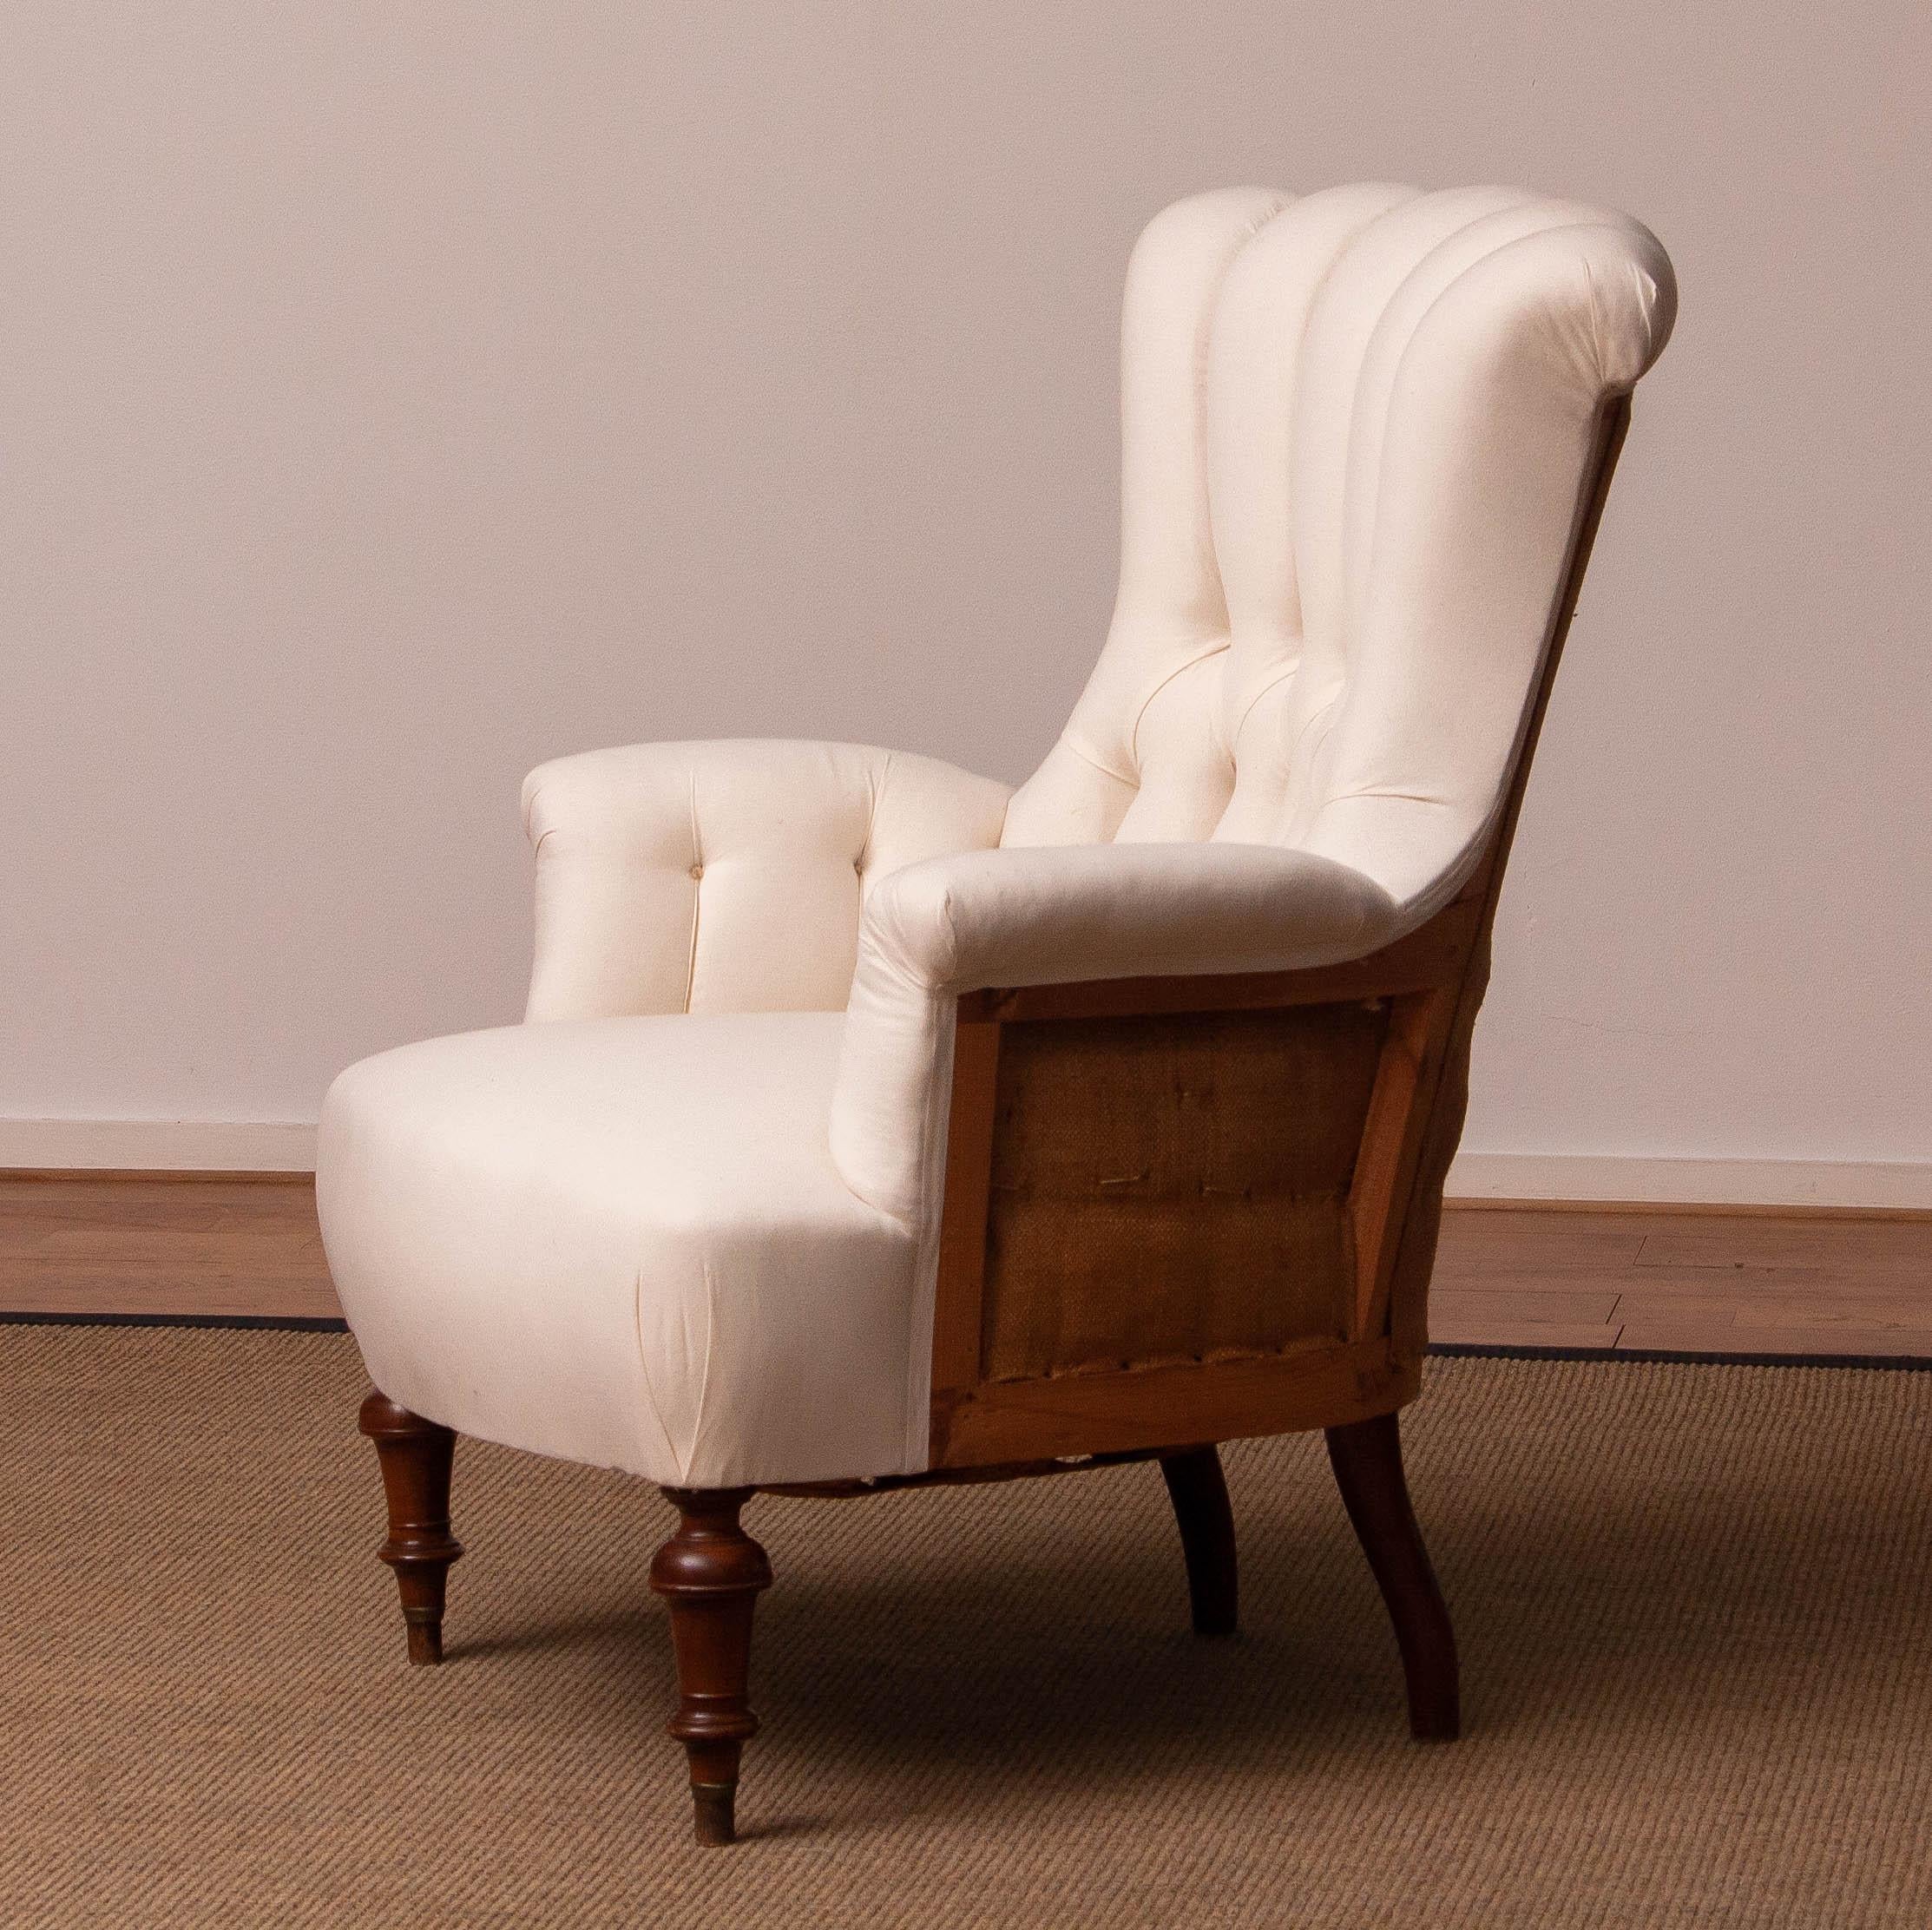 Swedish 19th Century Domestic Cotton Victorian 'Deconstructed' Tufted Scroll-Back Chair For Sale